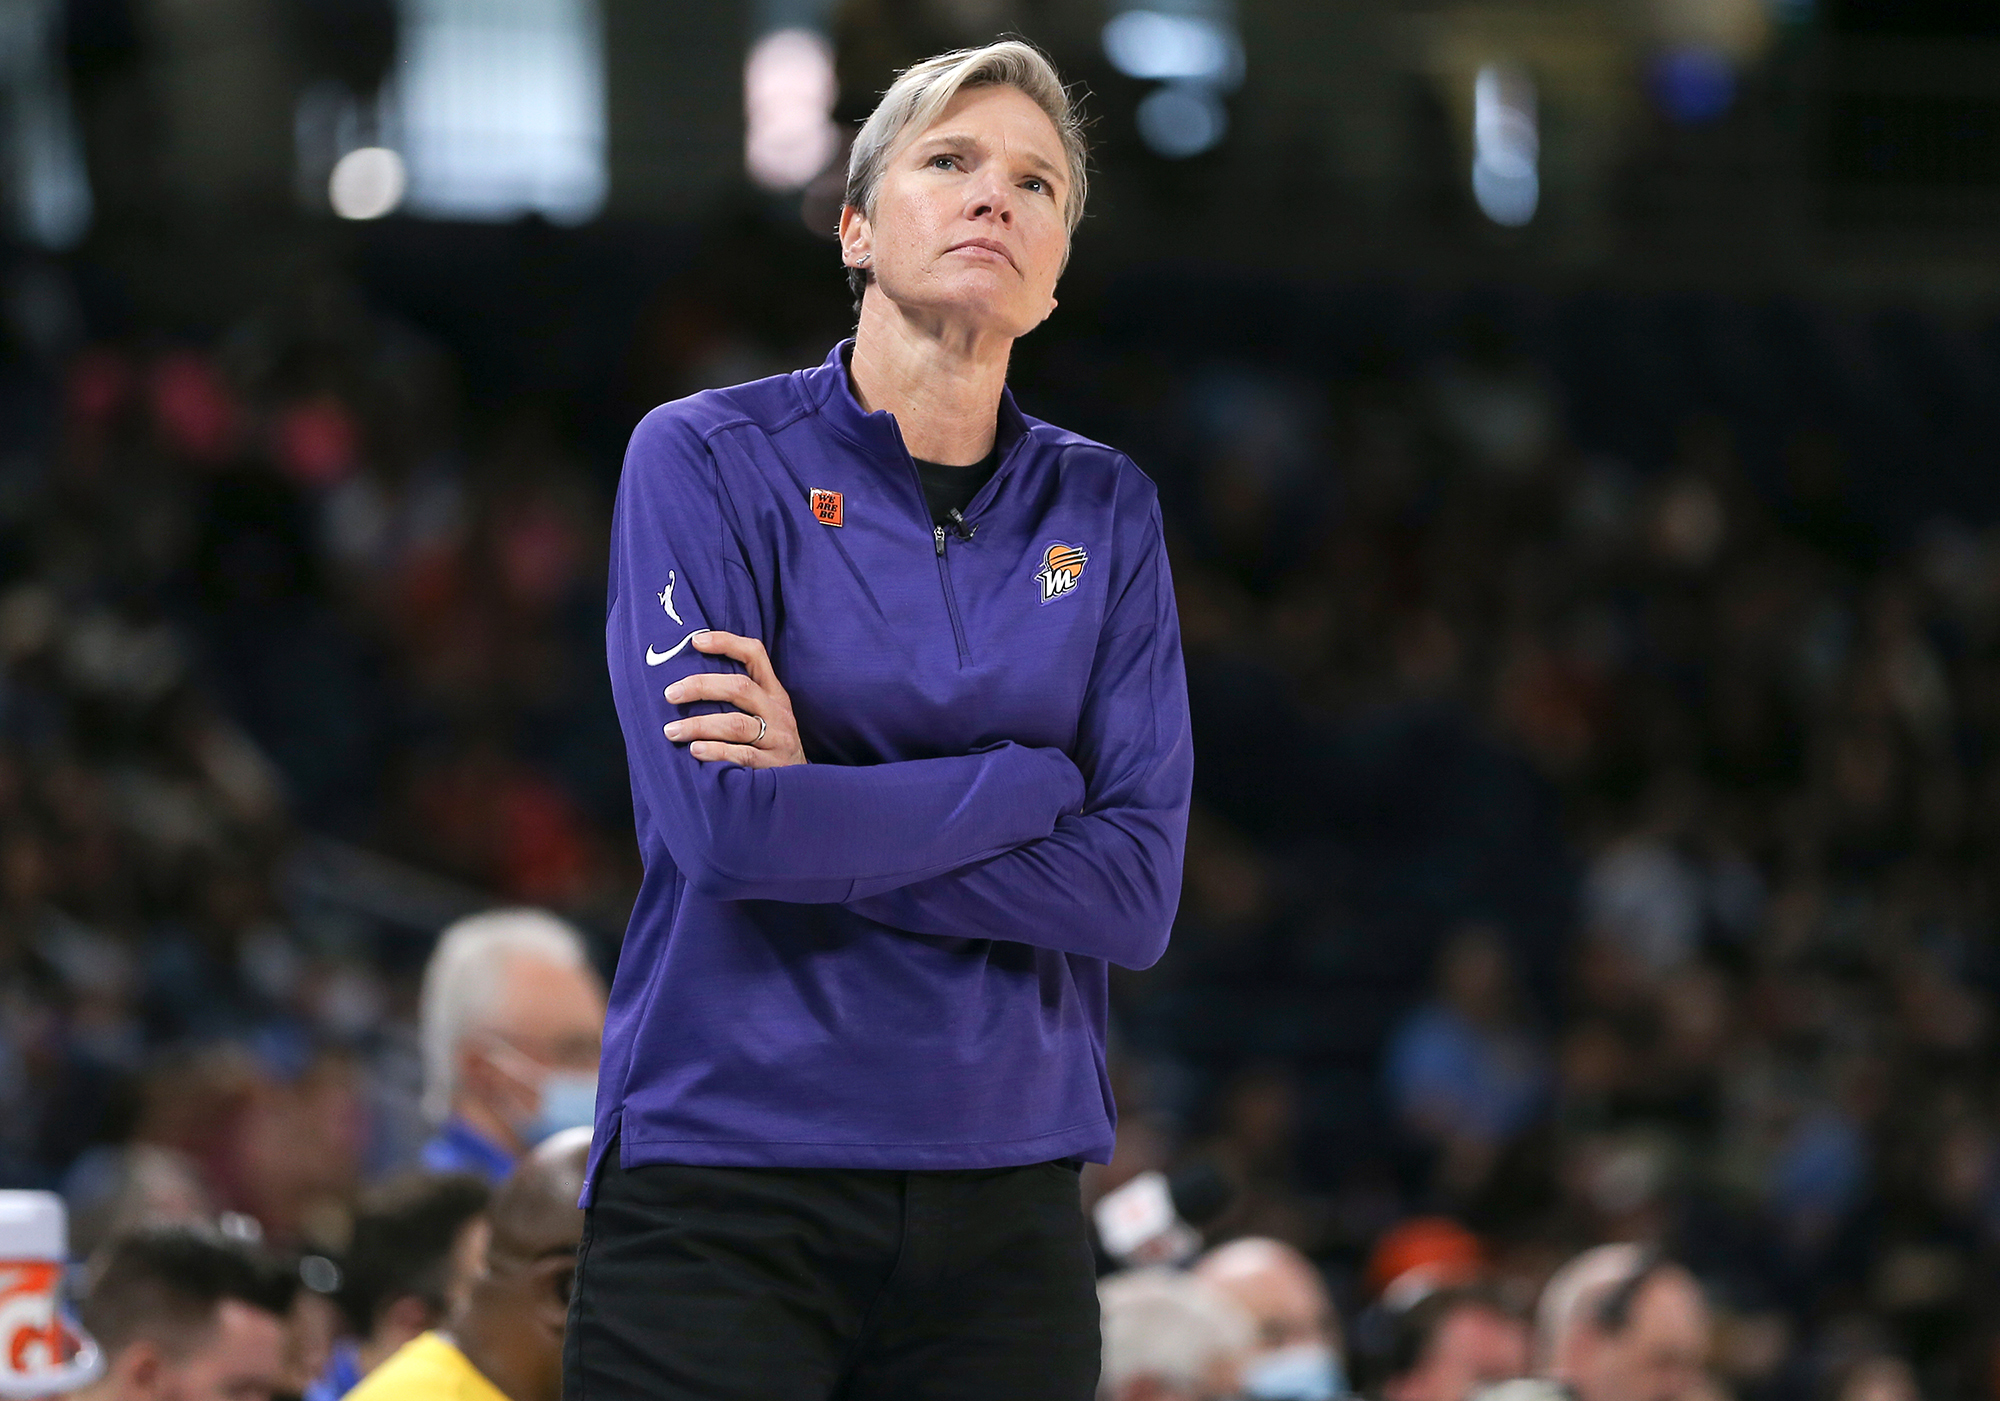 Phoenix Mercury head coach Vanessa Nygaard looks on during a WNBA game on July 2, in Chicago, Illinois. 